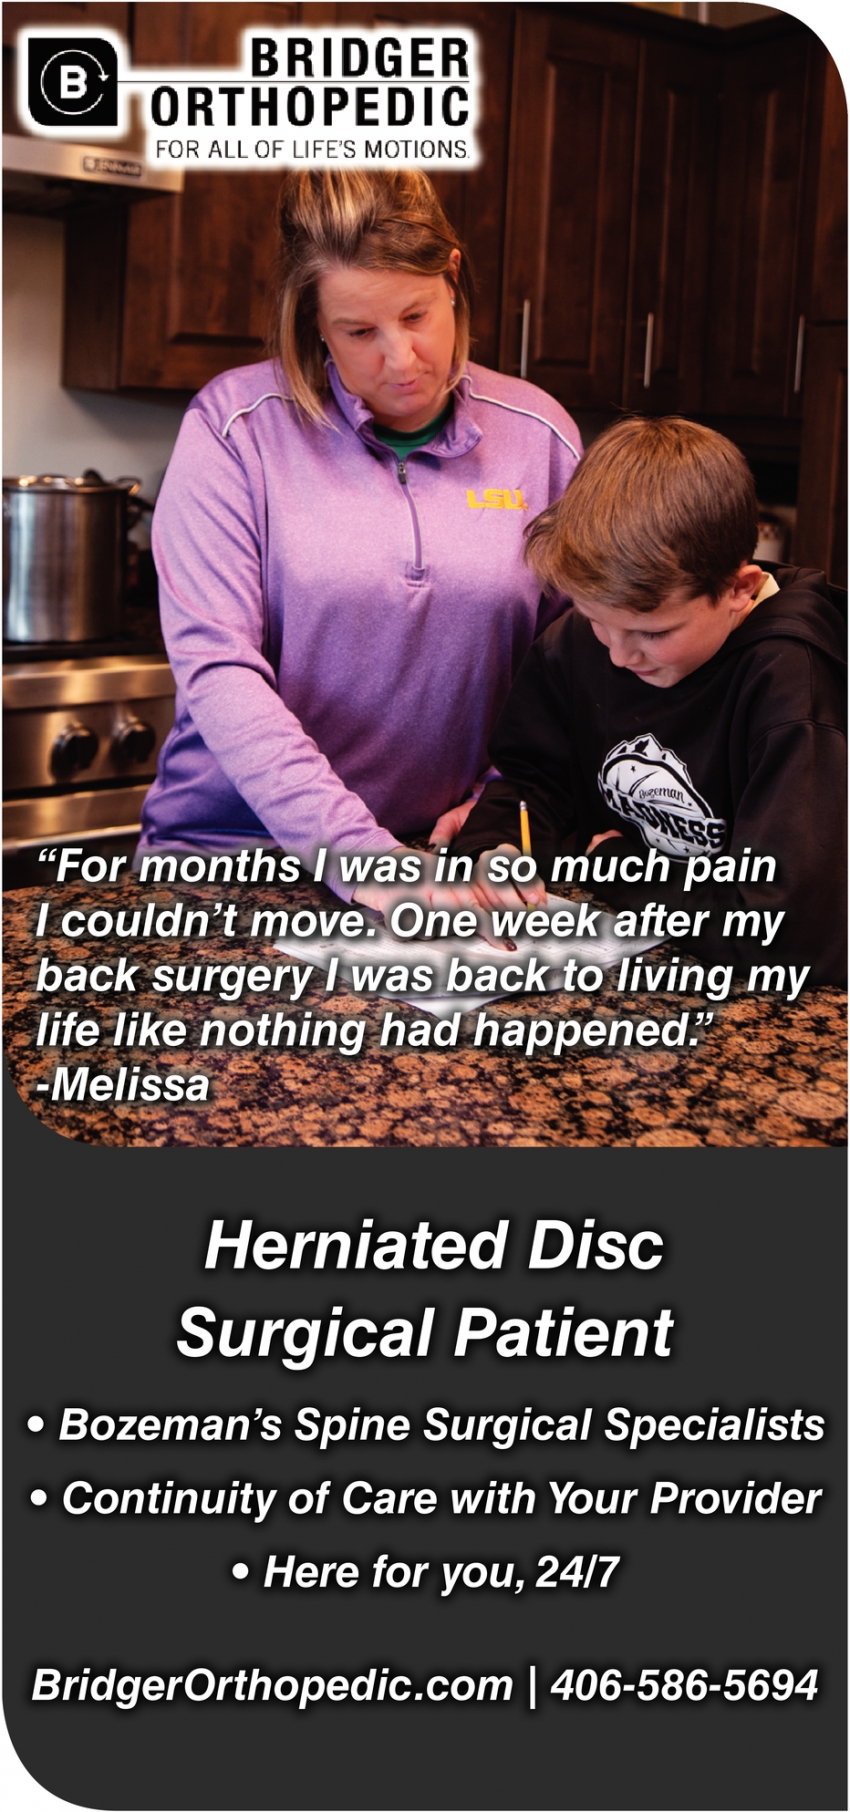 Herniated Disc Surgical Patient